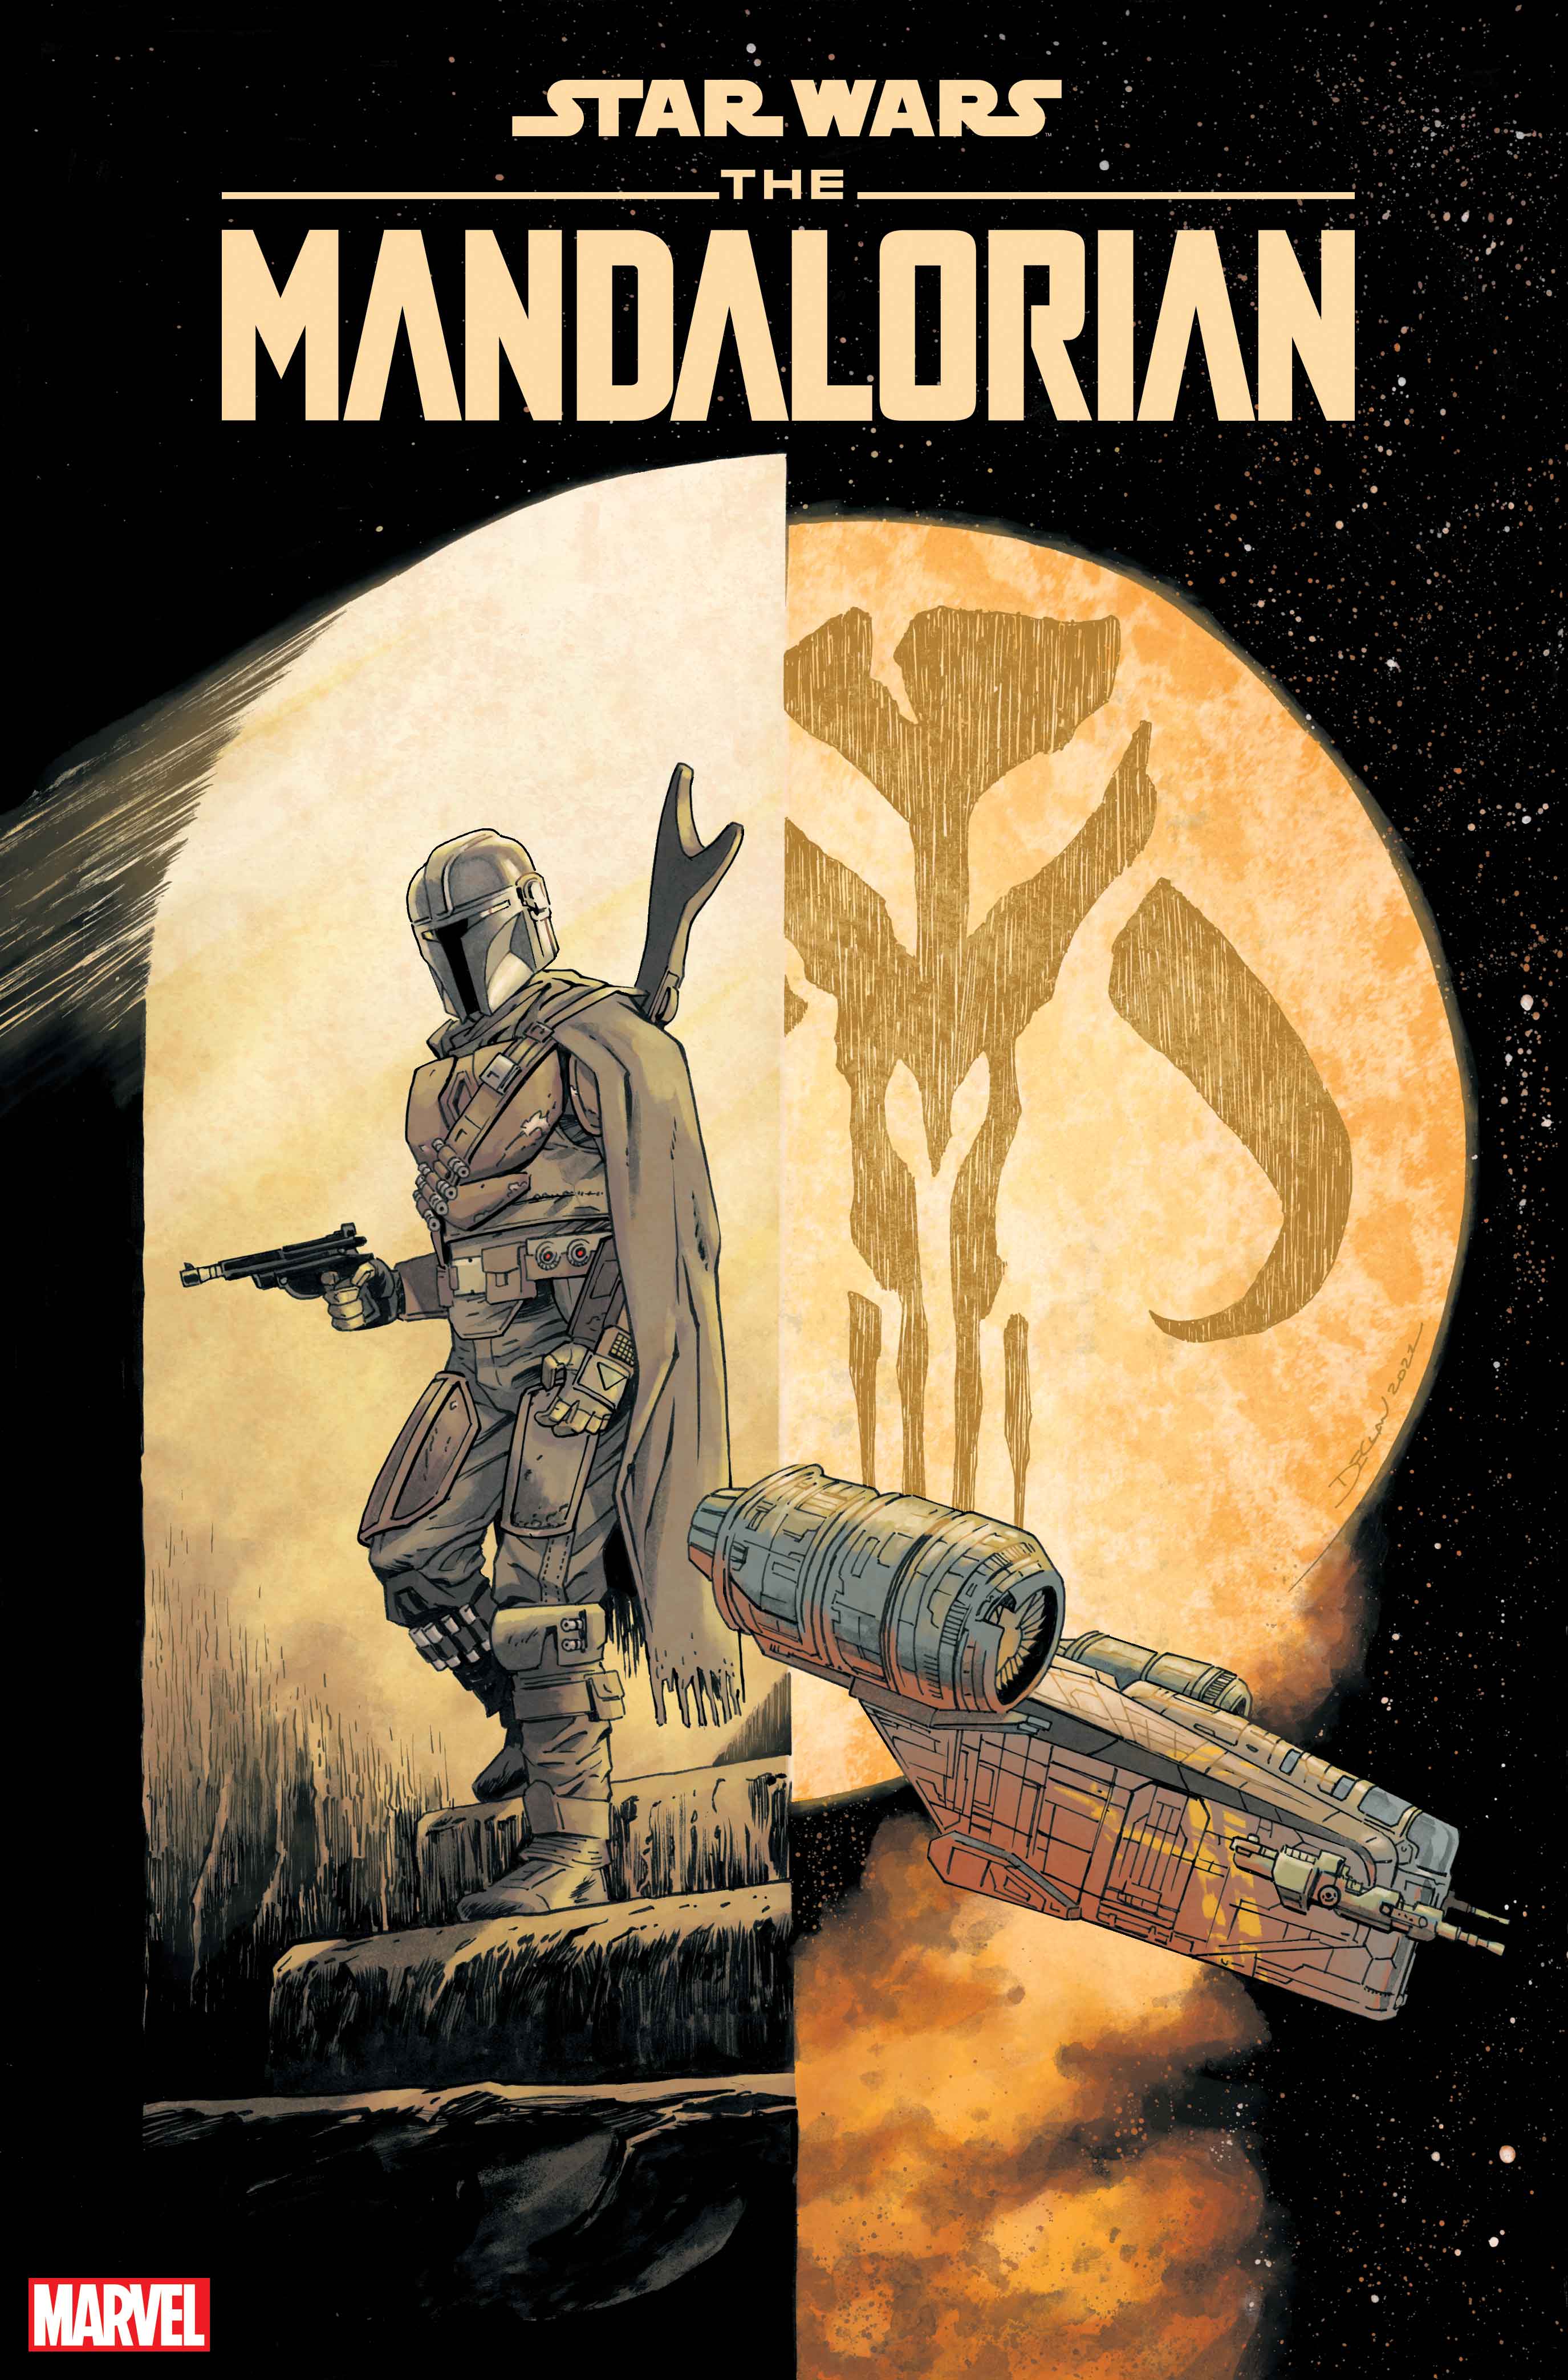 Declan Shalvey variant Star Wars: The Mandalorian issue 1, The Mandalorian is on the left holding his blaster and the Razor Crest is on the right